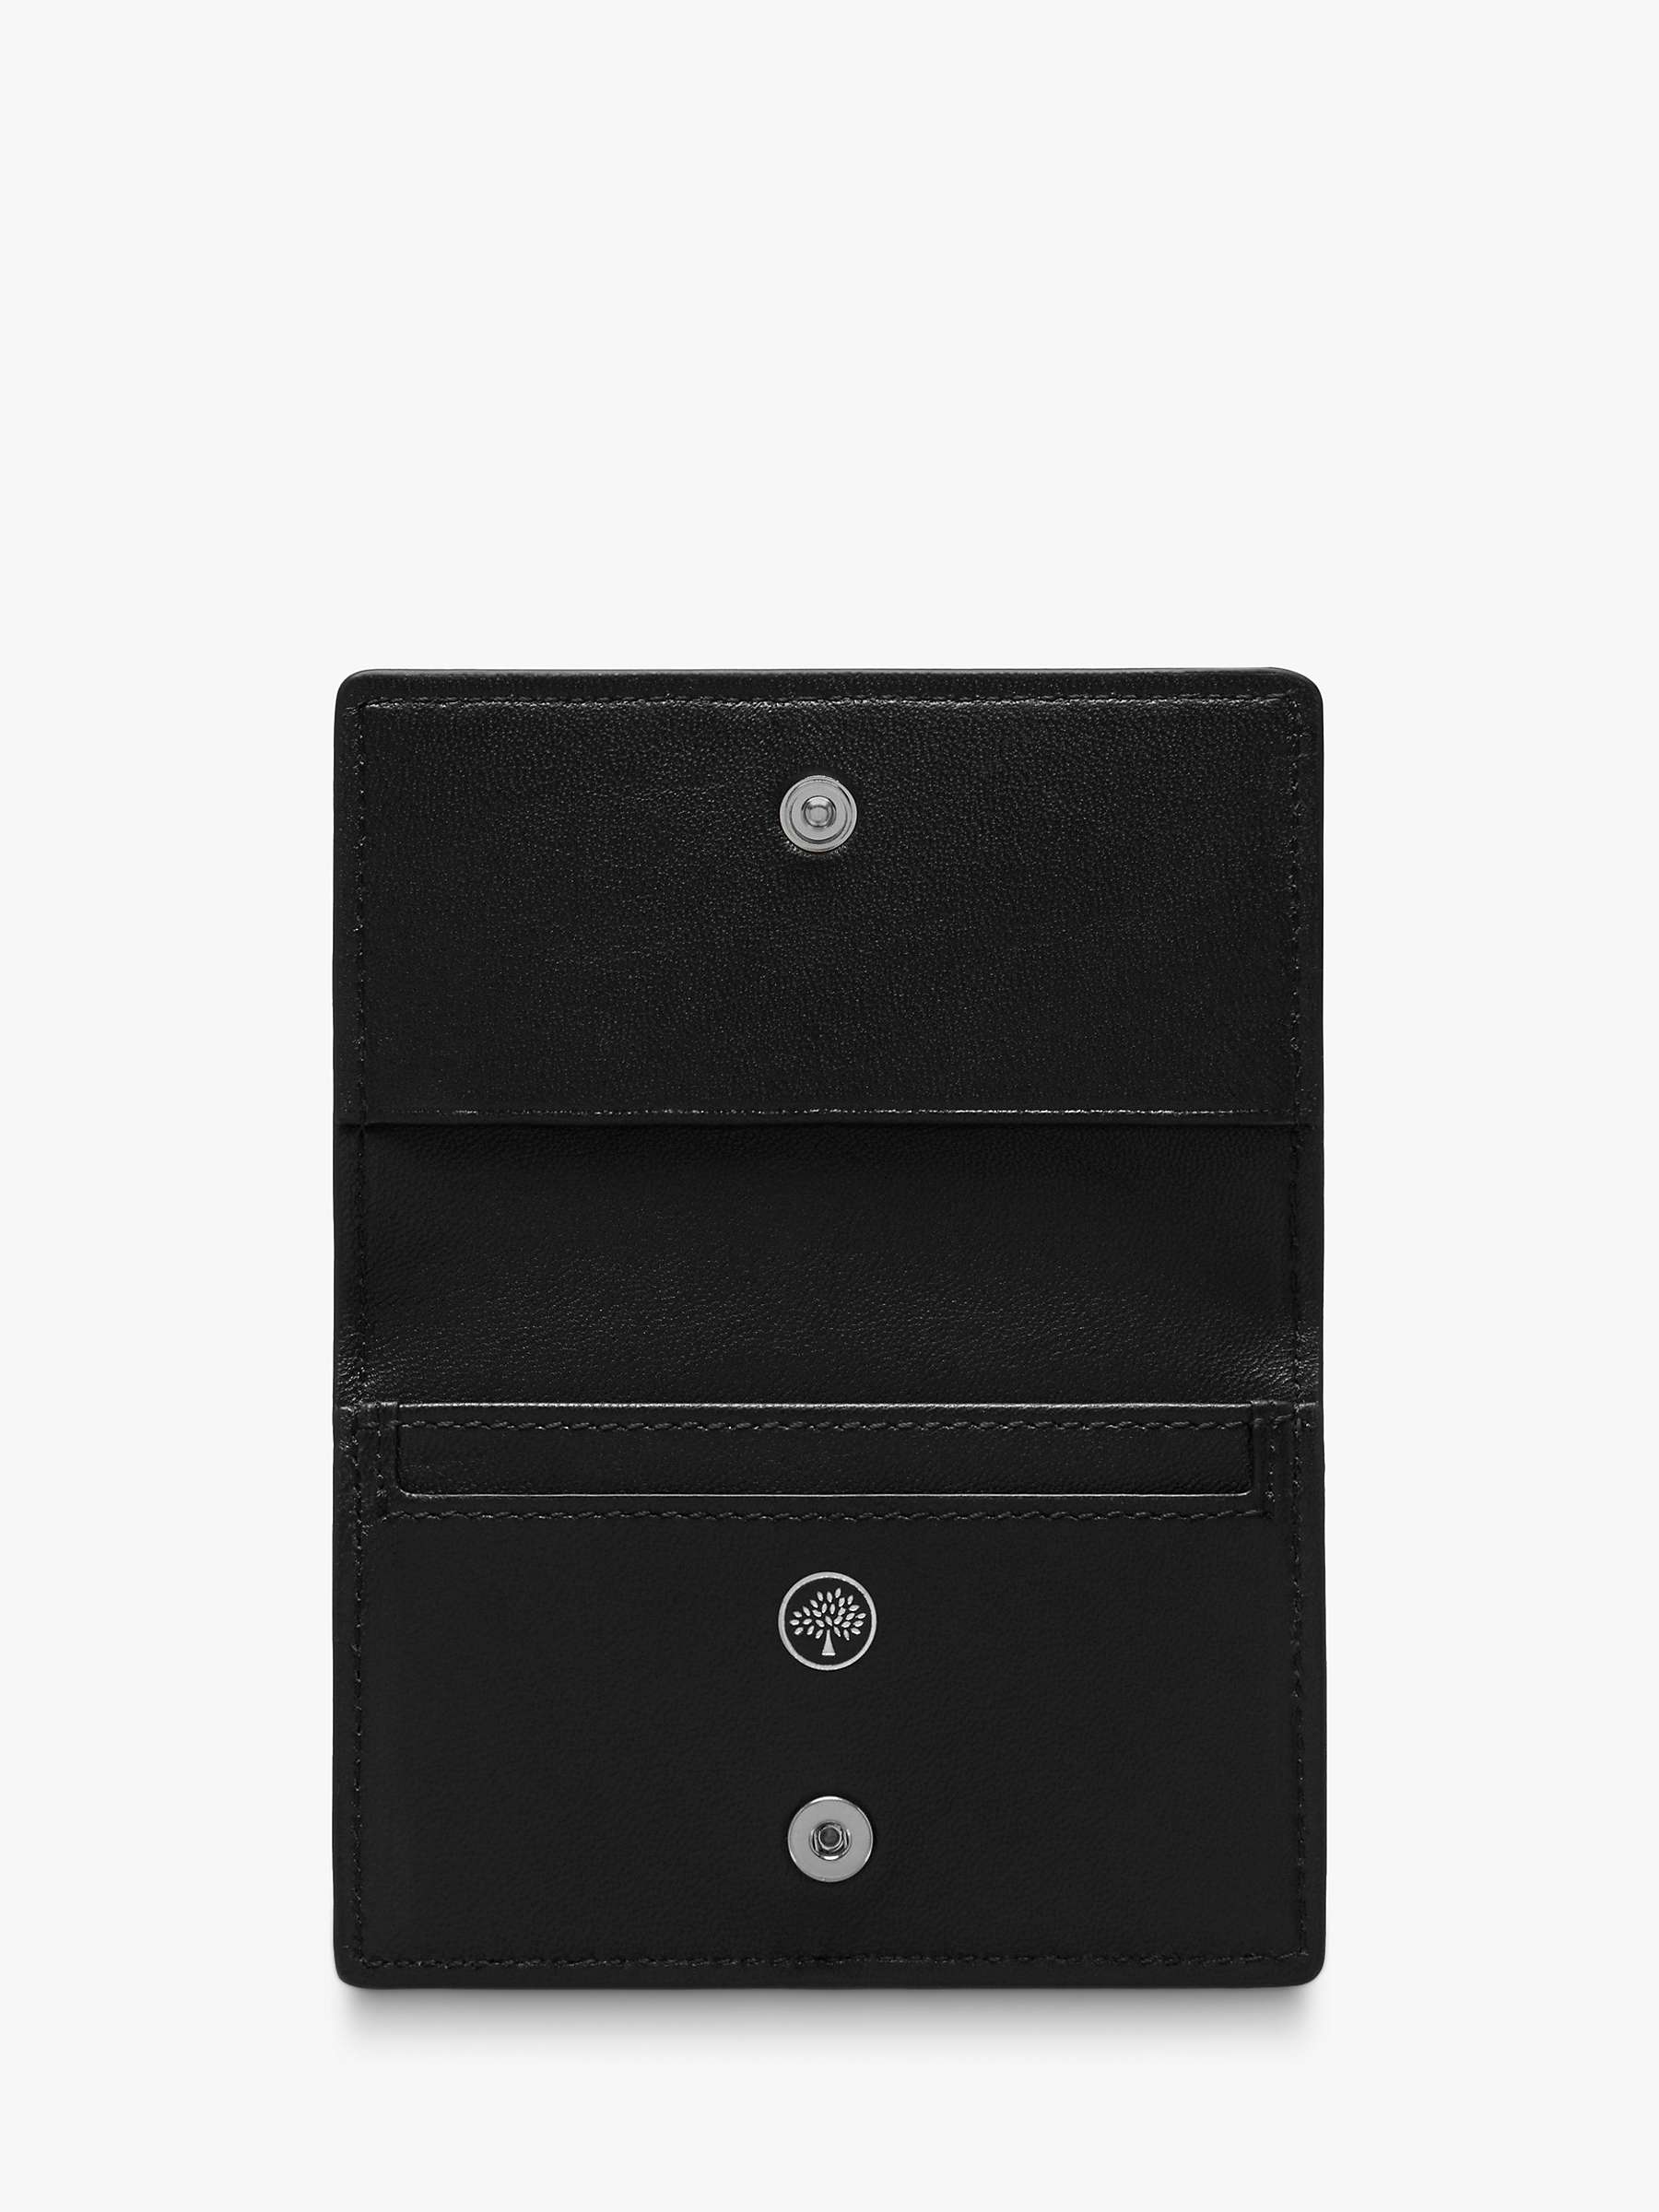 Buy Mulberry Small Classic Grain Leather Card Wallet, Black Online at johnlewis.com